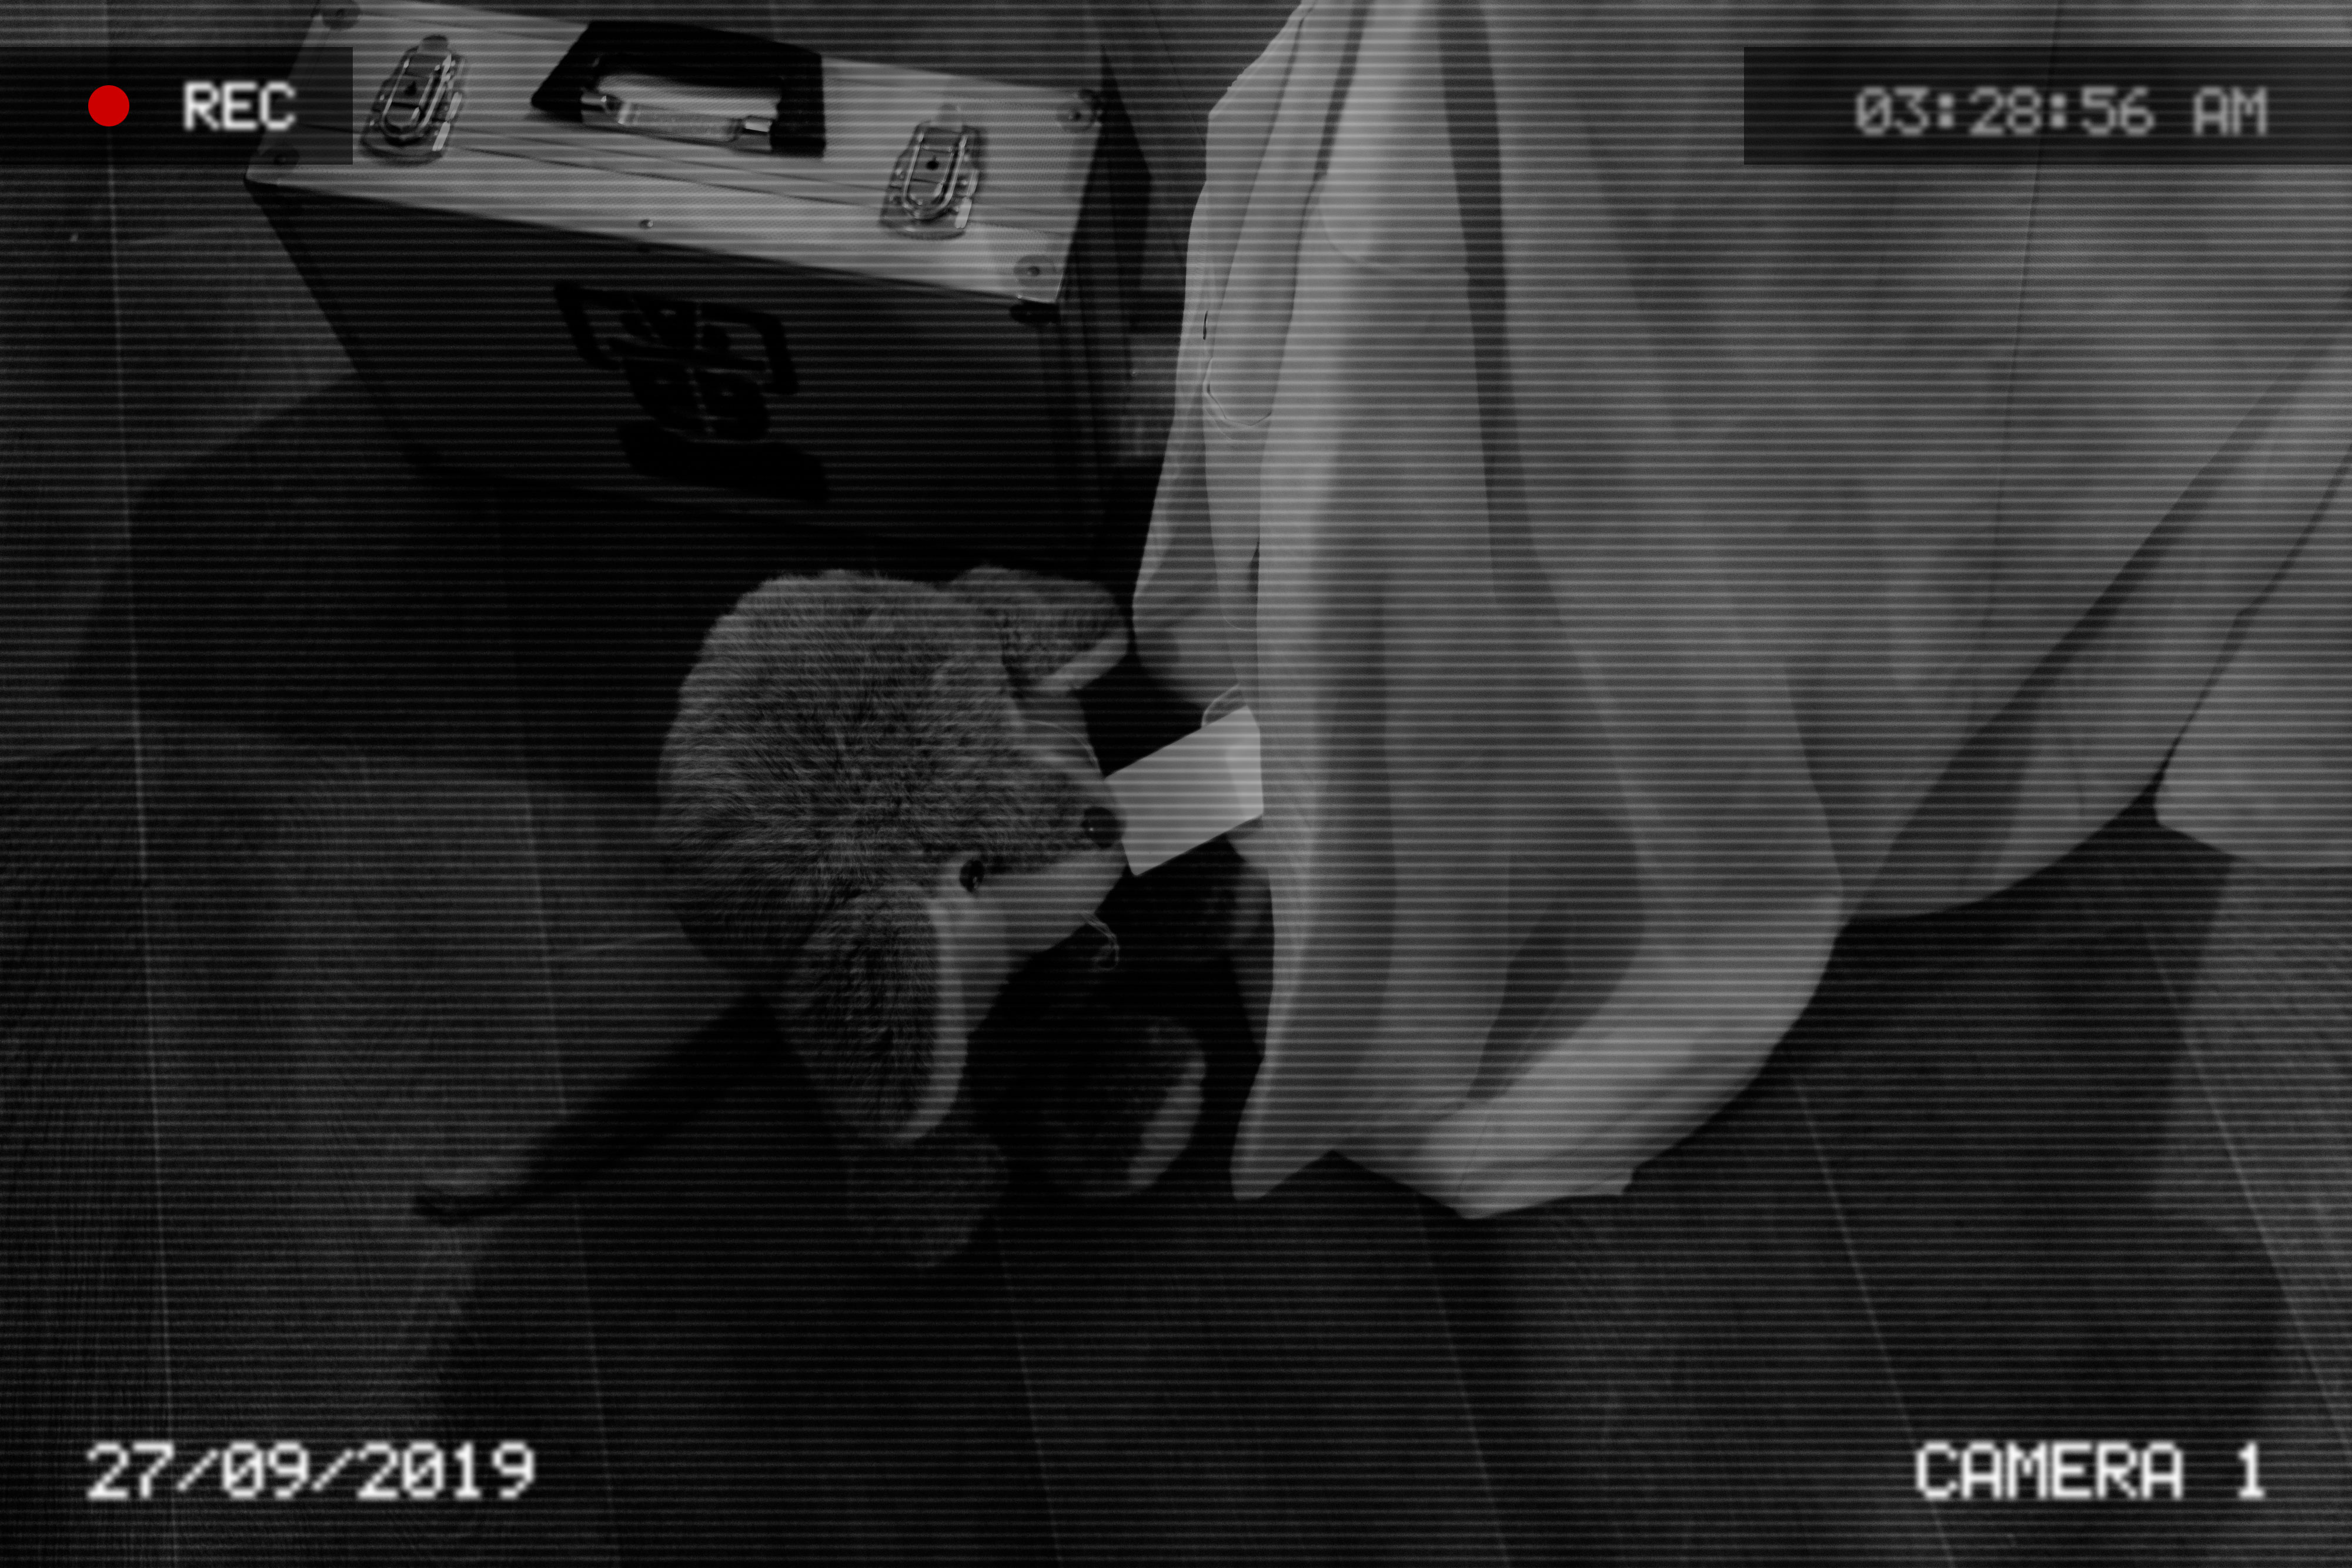 CCTV shows another cuddly toy stealing and RFID access card from the pocket of a lab coat